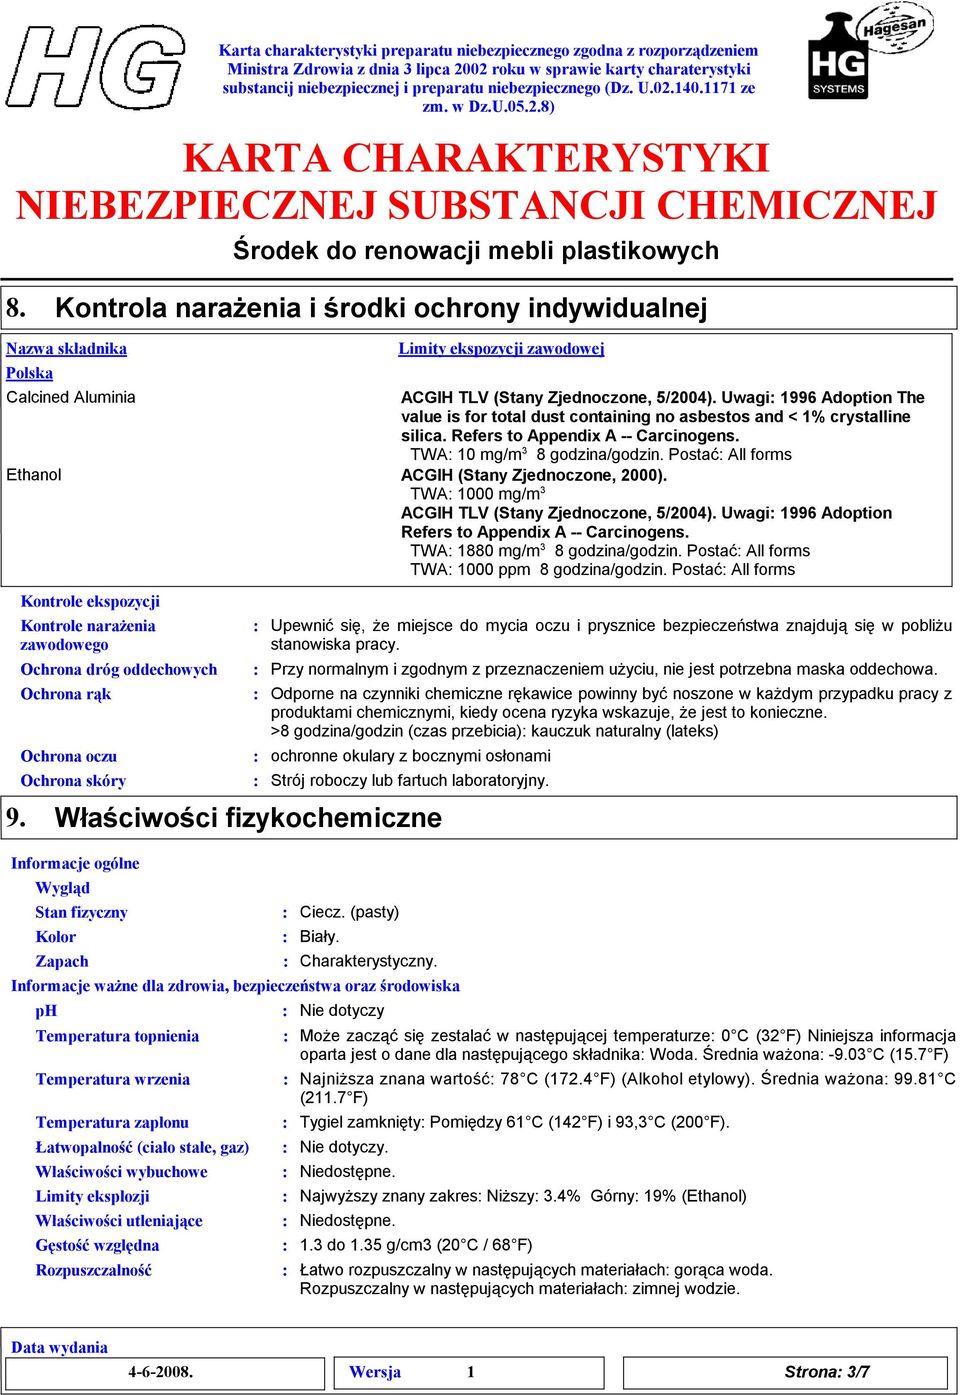 Postać Al forms Ethanol ACGIH (Stany Zjednoczone, 2000). TWA 1000 mg/m 3 ACGIH TLV (Stany Zjednoczone, 5/2004). Uwagi 1996 Adoption Refers to Appendix A -- Carcinogens.